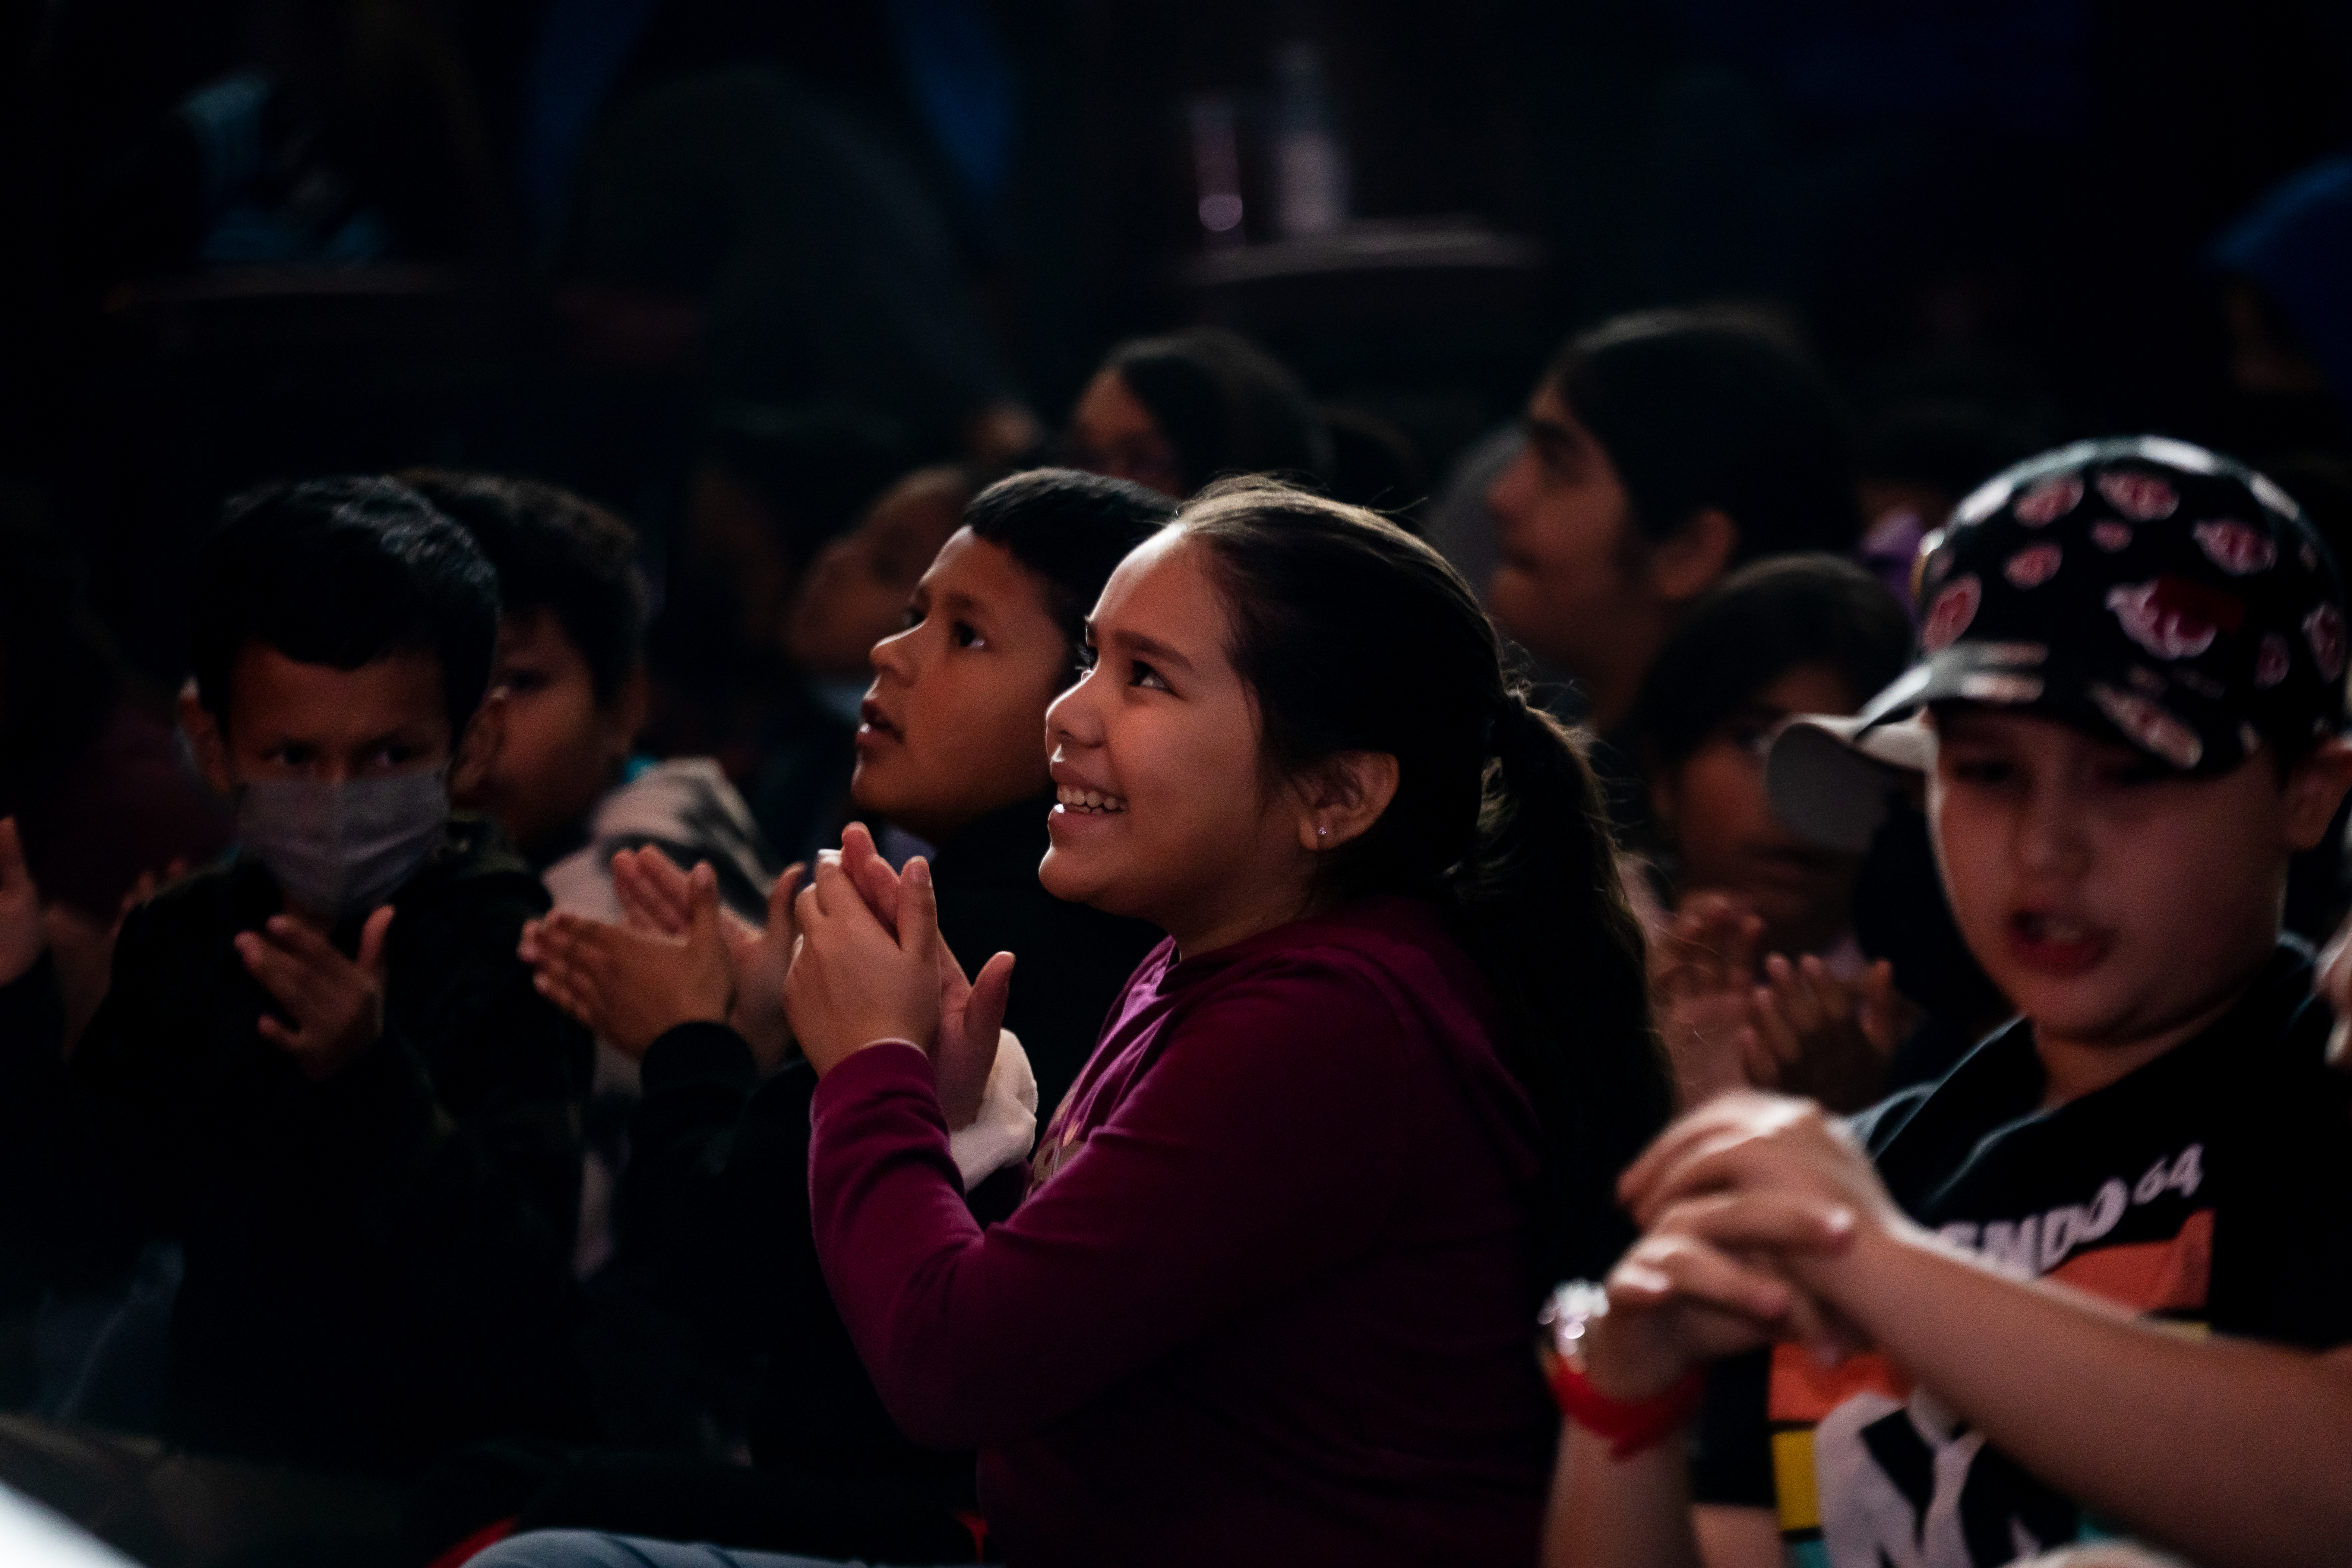 Child watching a musical performance and clapping